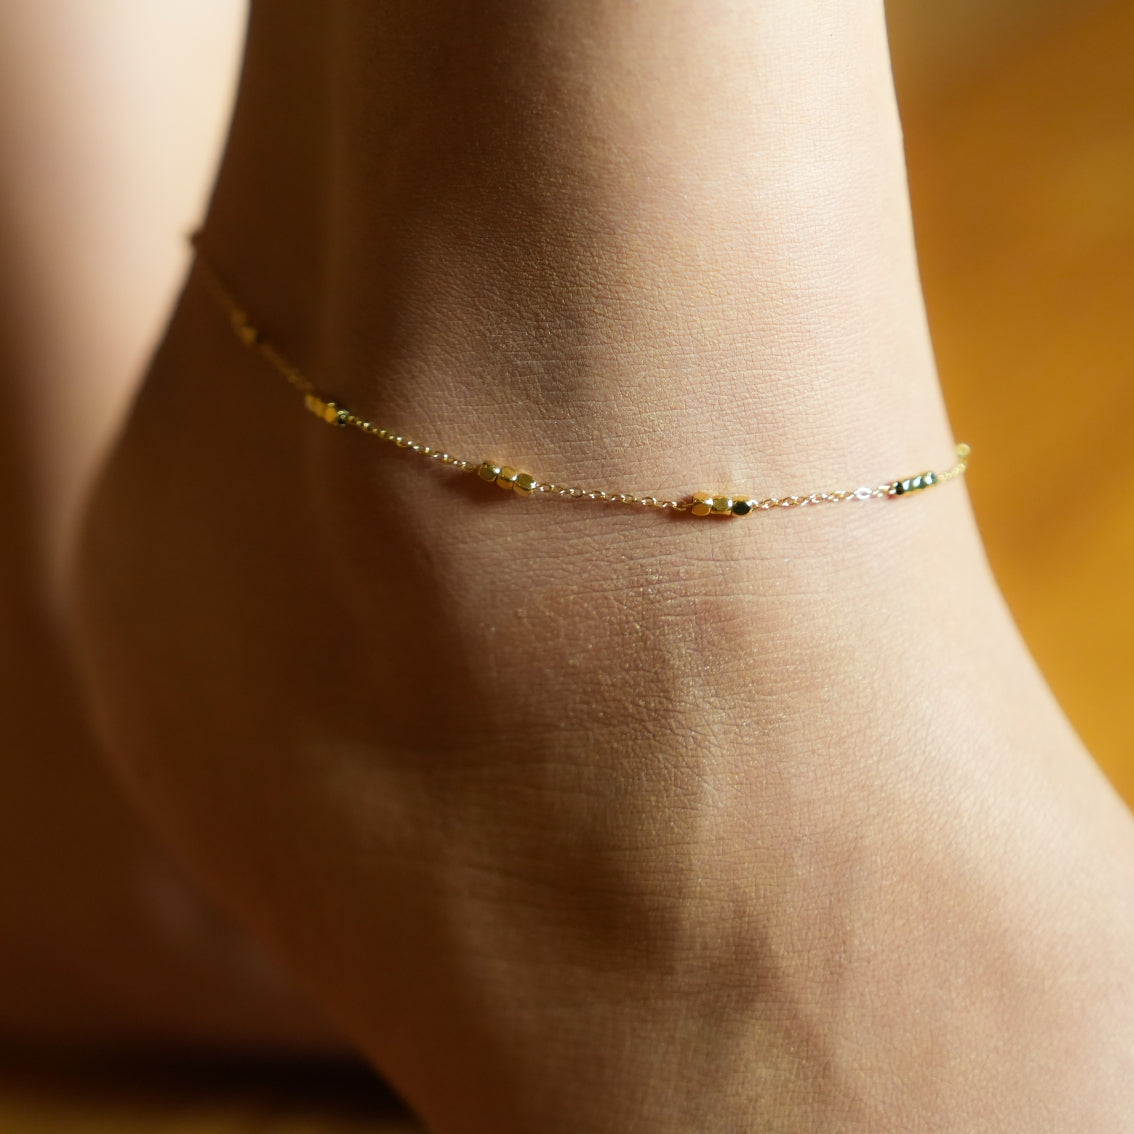 Style RITIKA LG 6333: Tiny Square-Beads Dainty Gold Chain Anklet.